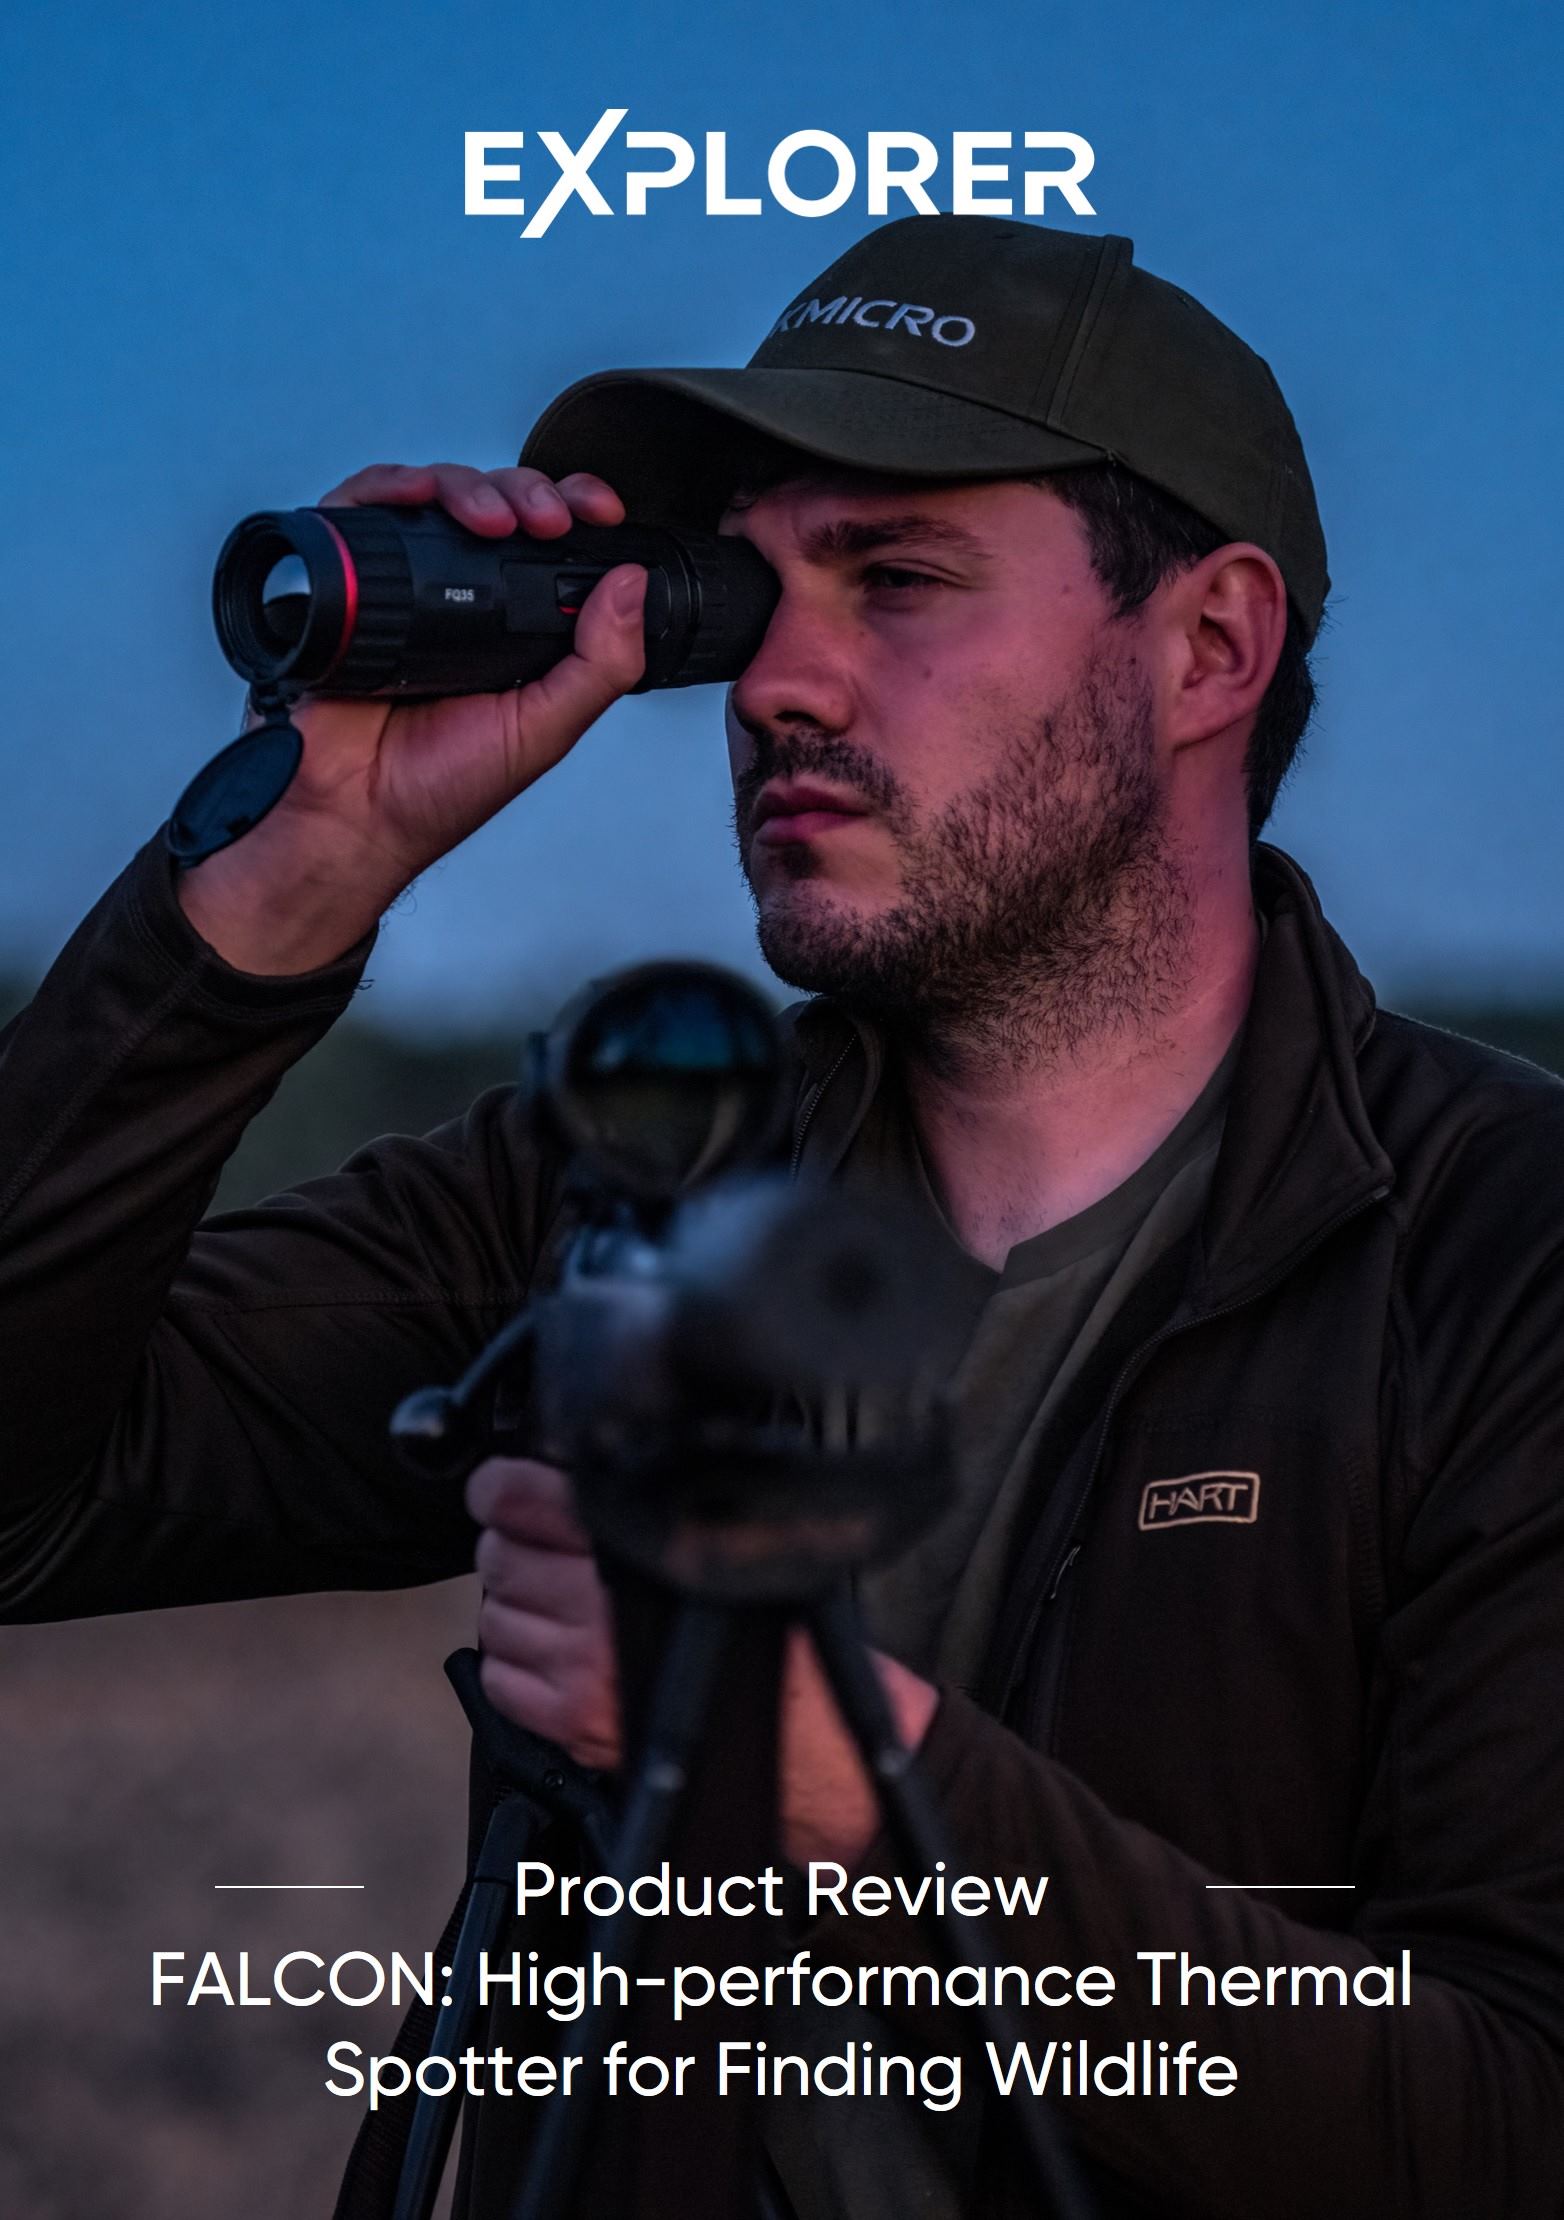 HIKMICRO FALCON: High-performance Thermal Spotter for Finding Wildlife